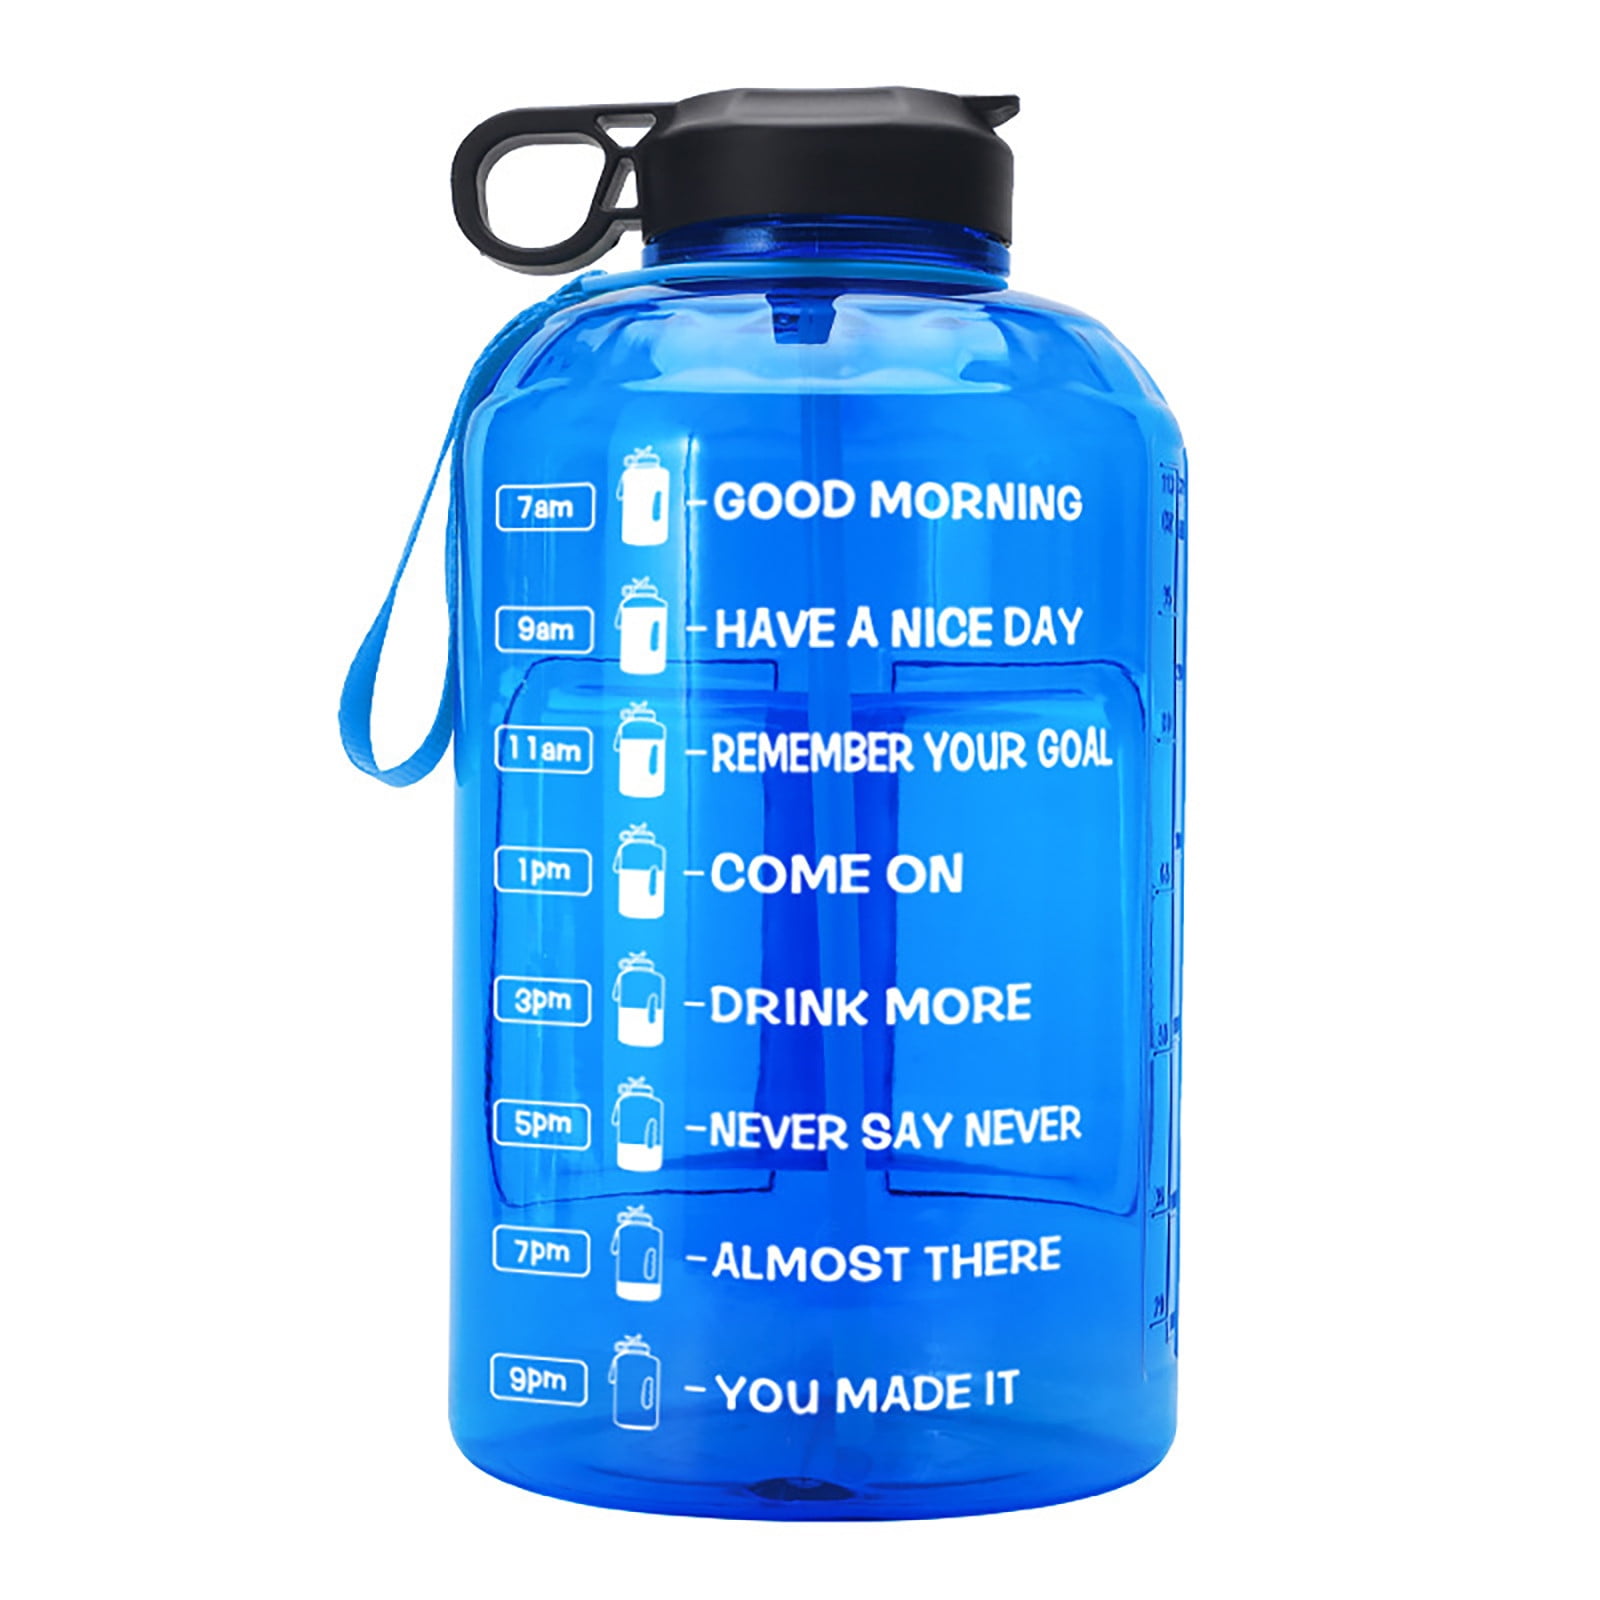 Diller Water Bottle - The weekend is here!Don't forget to drink